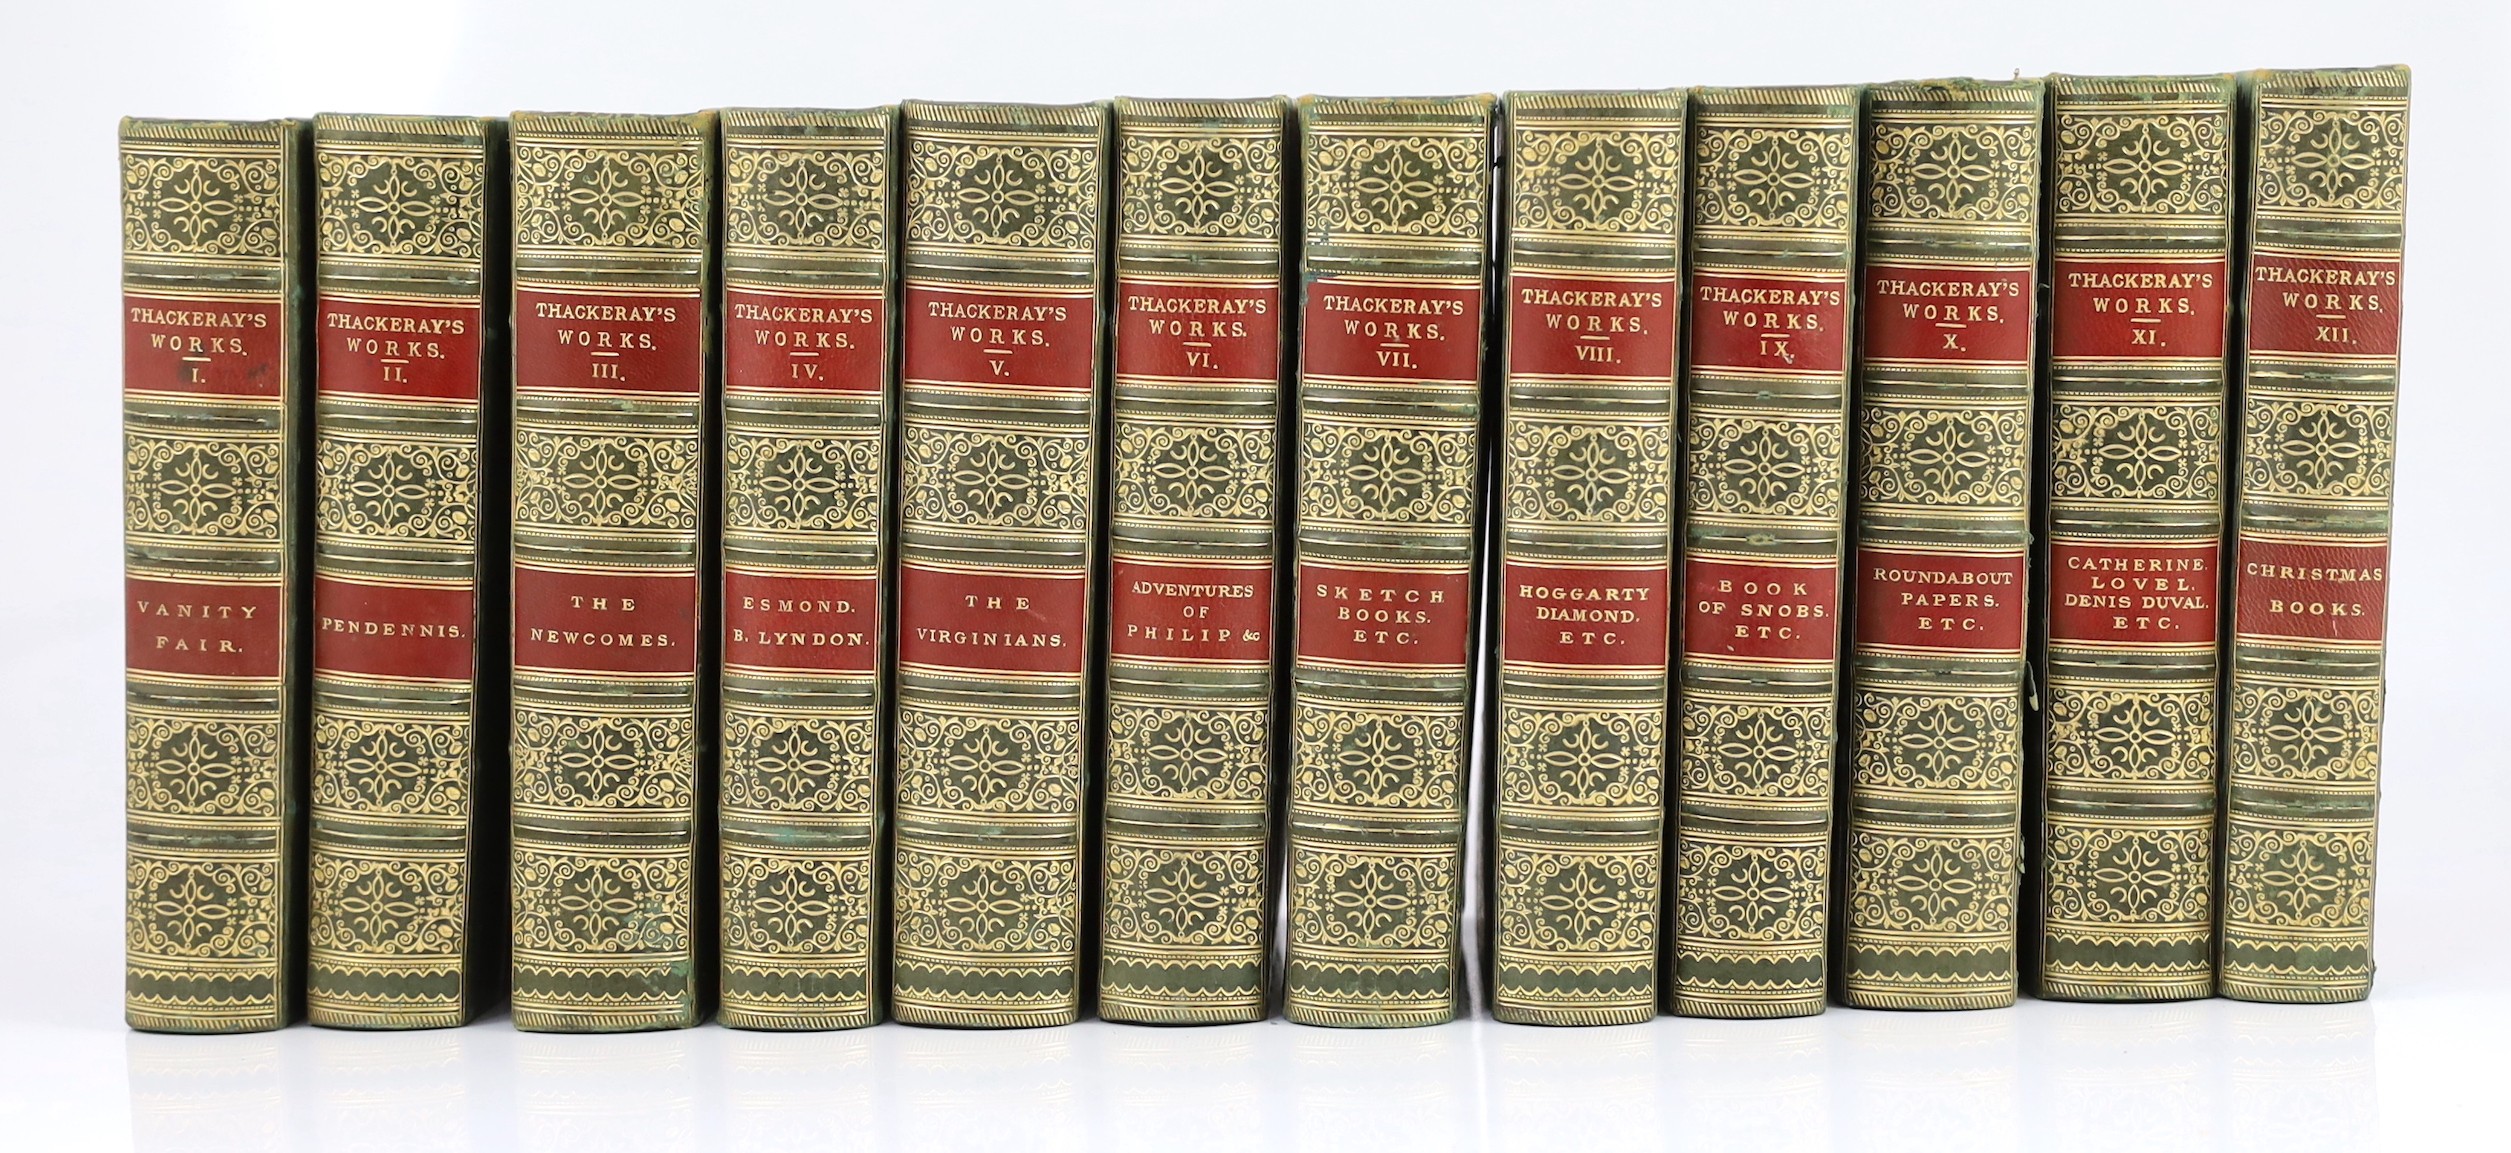 Thackeray, William Makepeace - The Works, of 12 vols. num. plates and other illus.; contemp. green half calf and marbled boards, gilt decorated and panelled spines with red labels, marbled edges and e/ps., cr.8vo. (ca.18